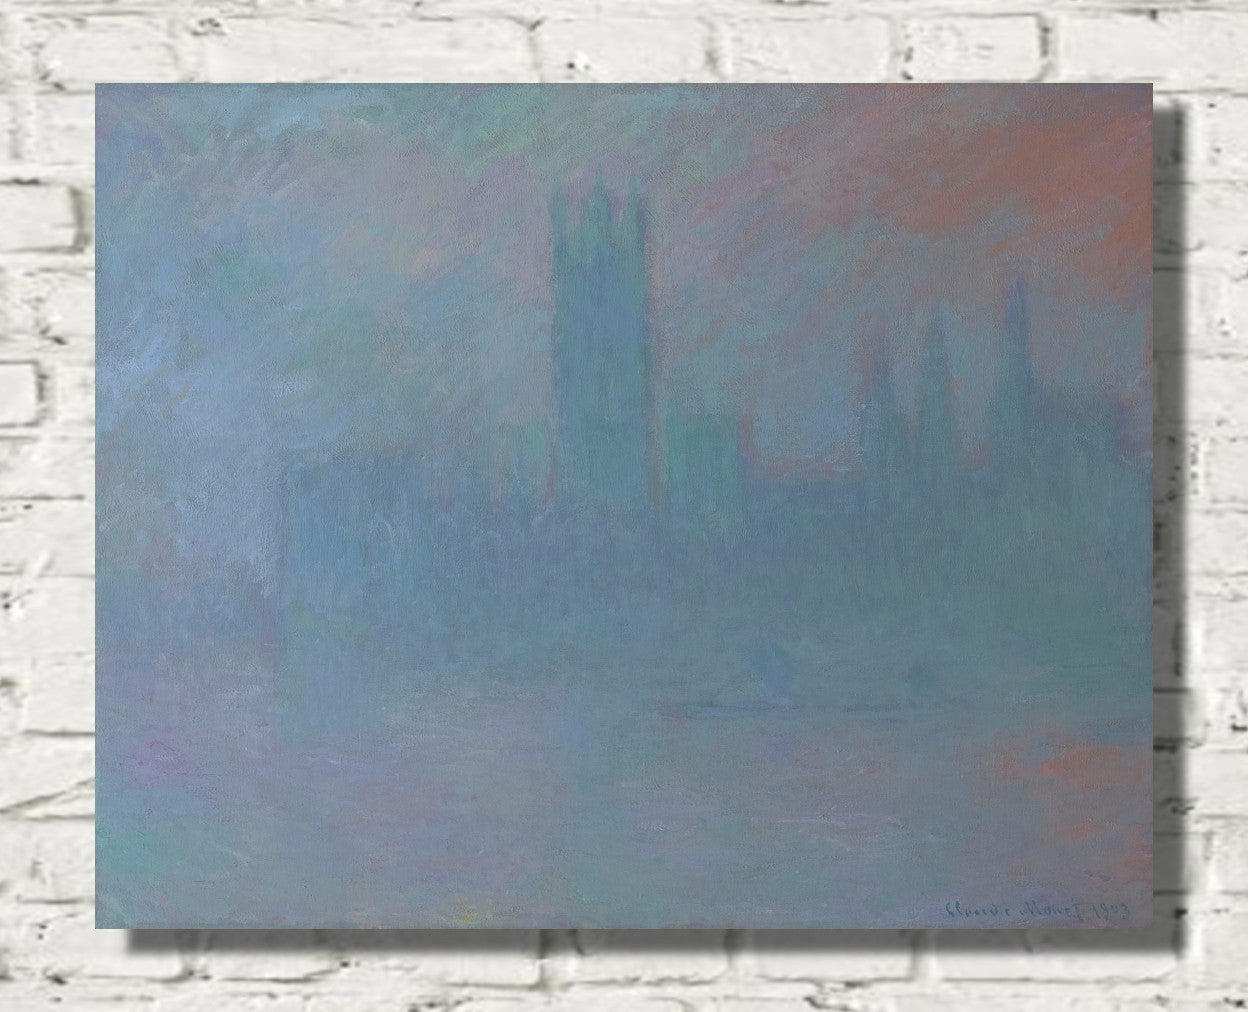 Houses of Parliament in the Fog by Claude Monet